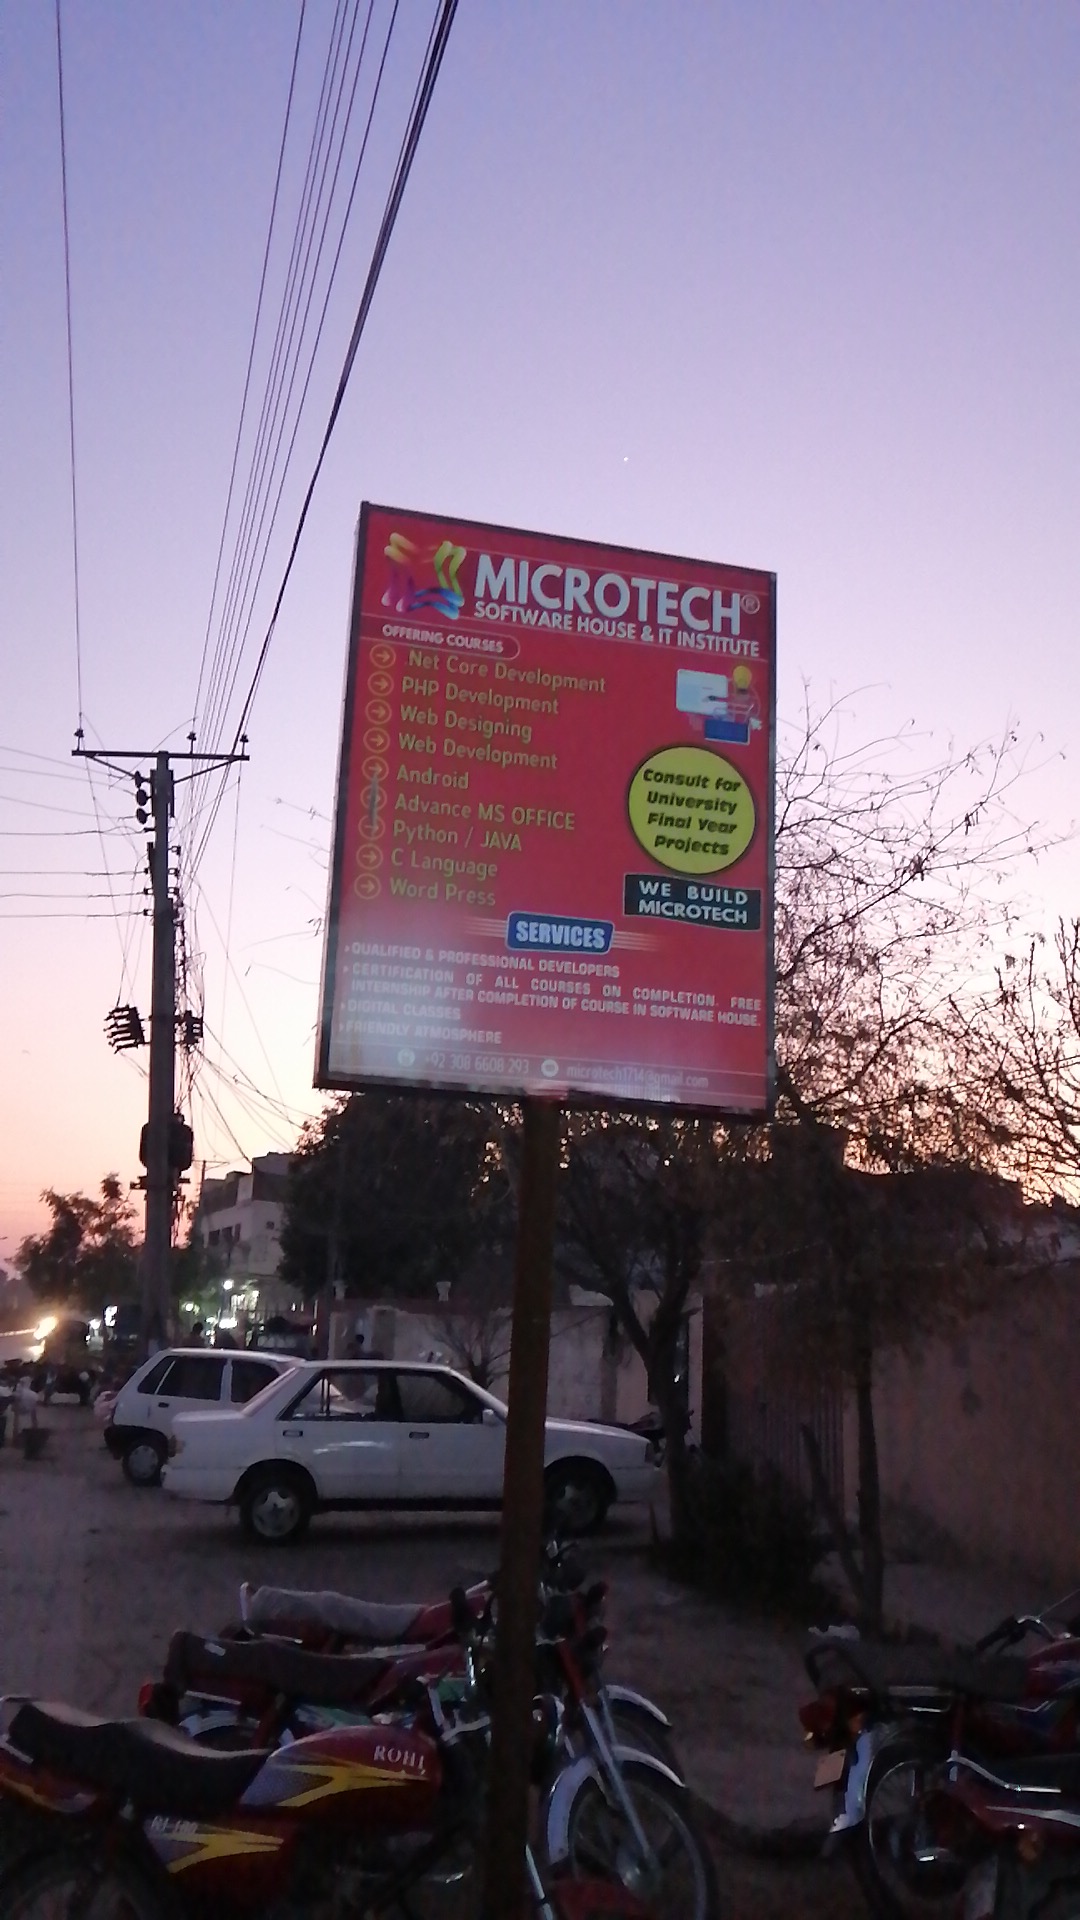 Microtech Software House & IT institute